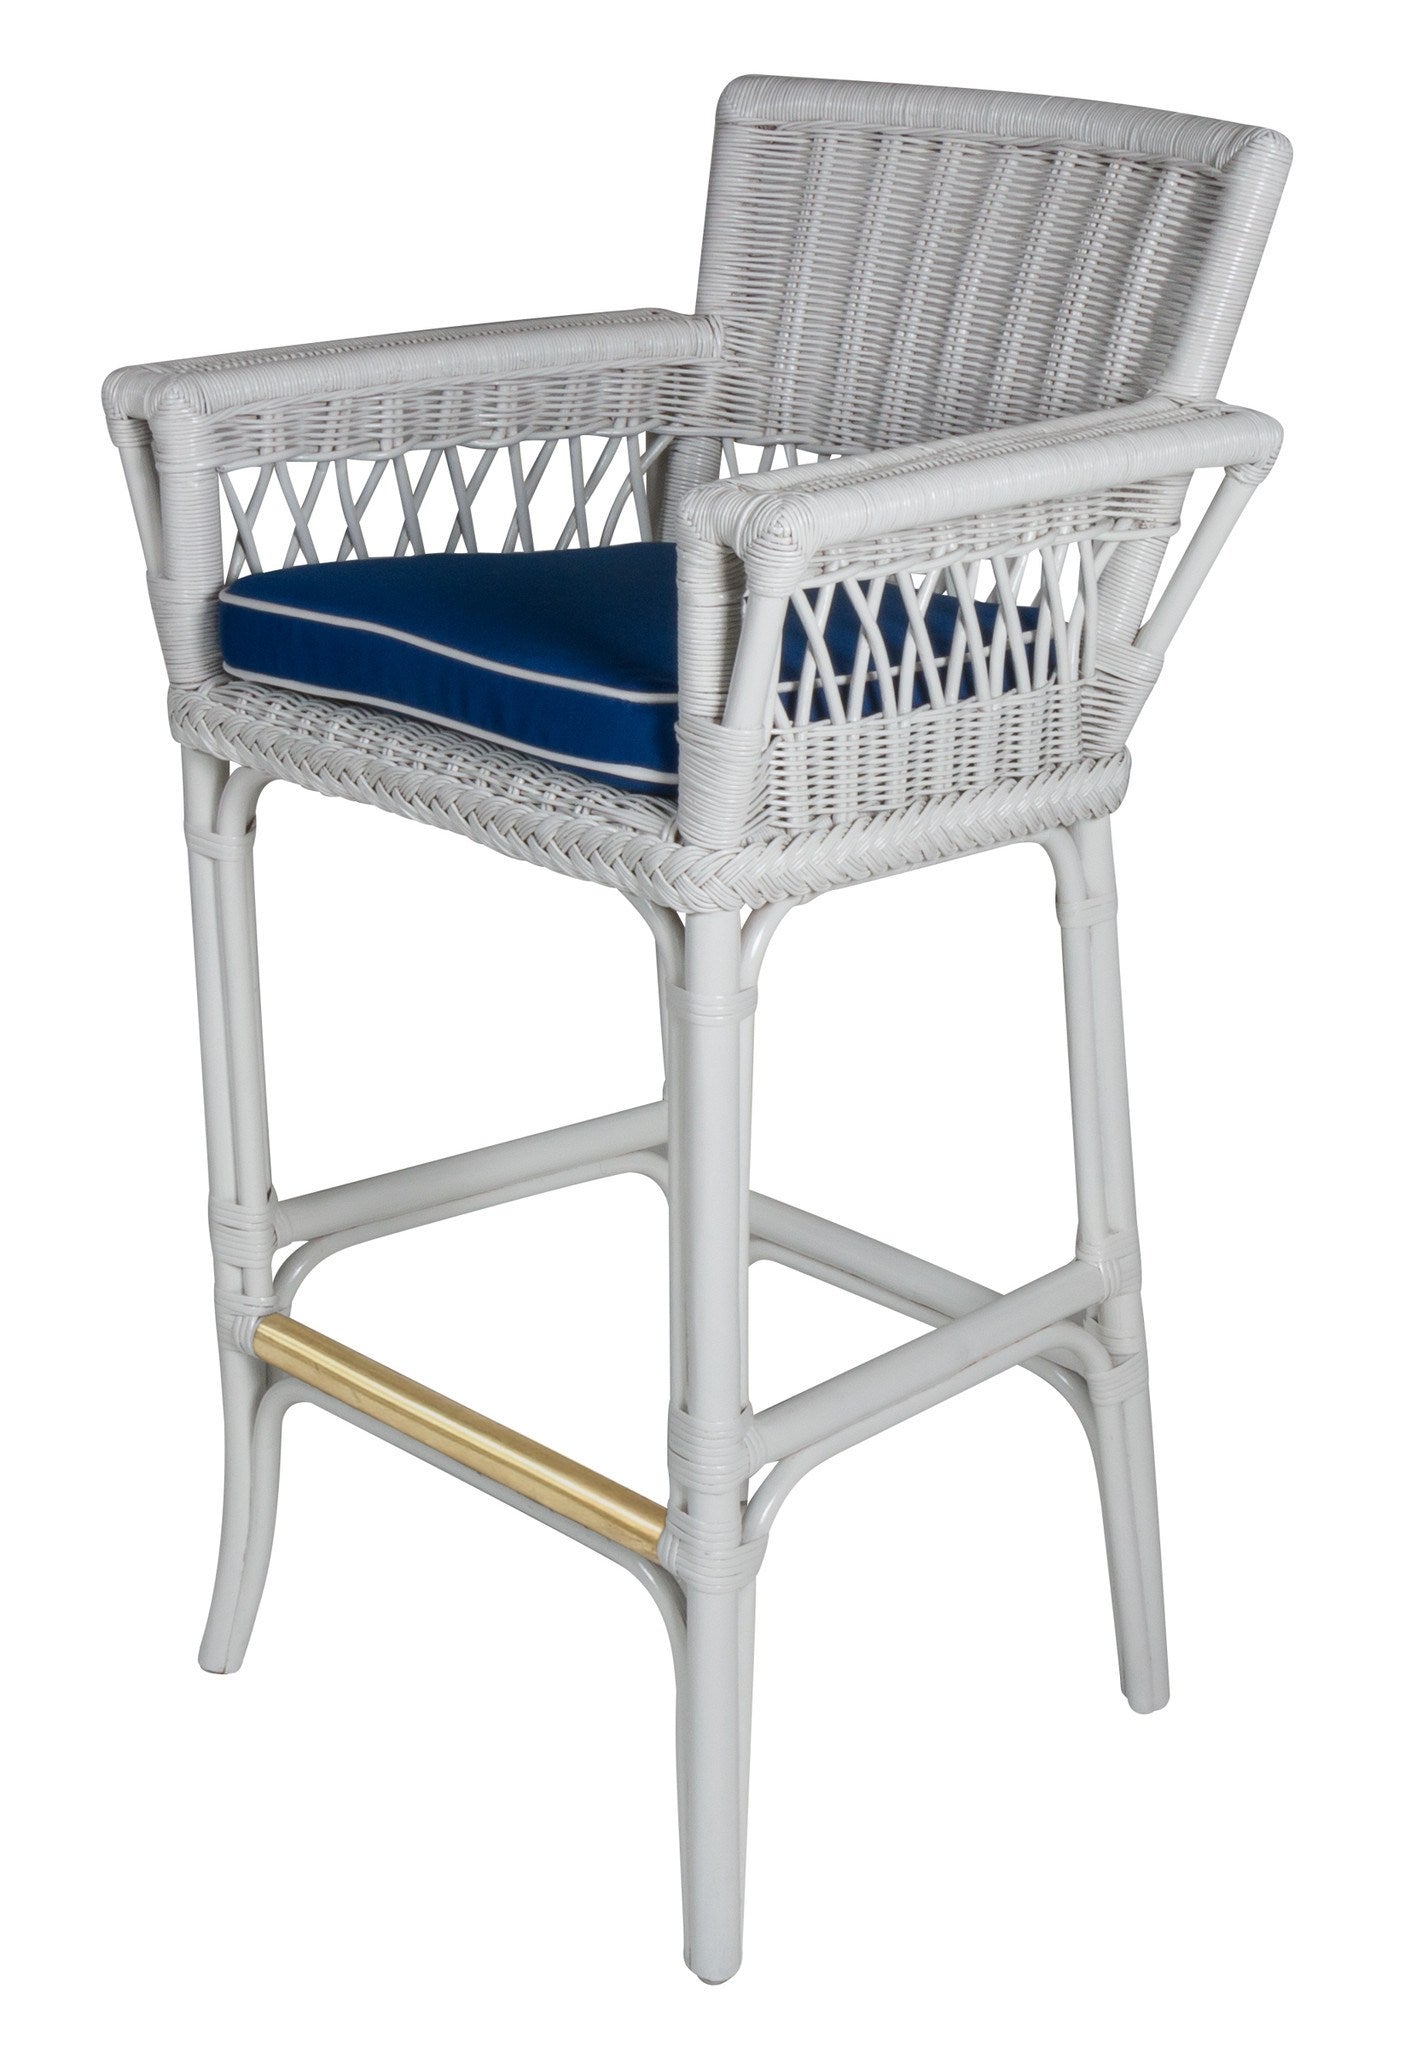 Designer Wicker & Rattan By Tribor Windsor Barstool Armless by Design Wicker from Tribor Bar Stool - Rattan Imports